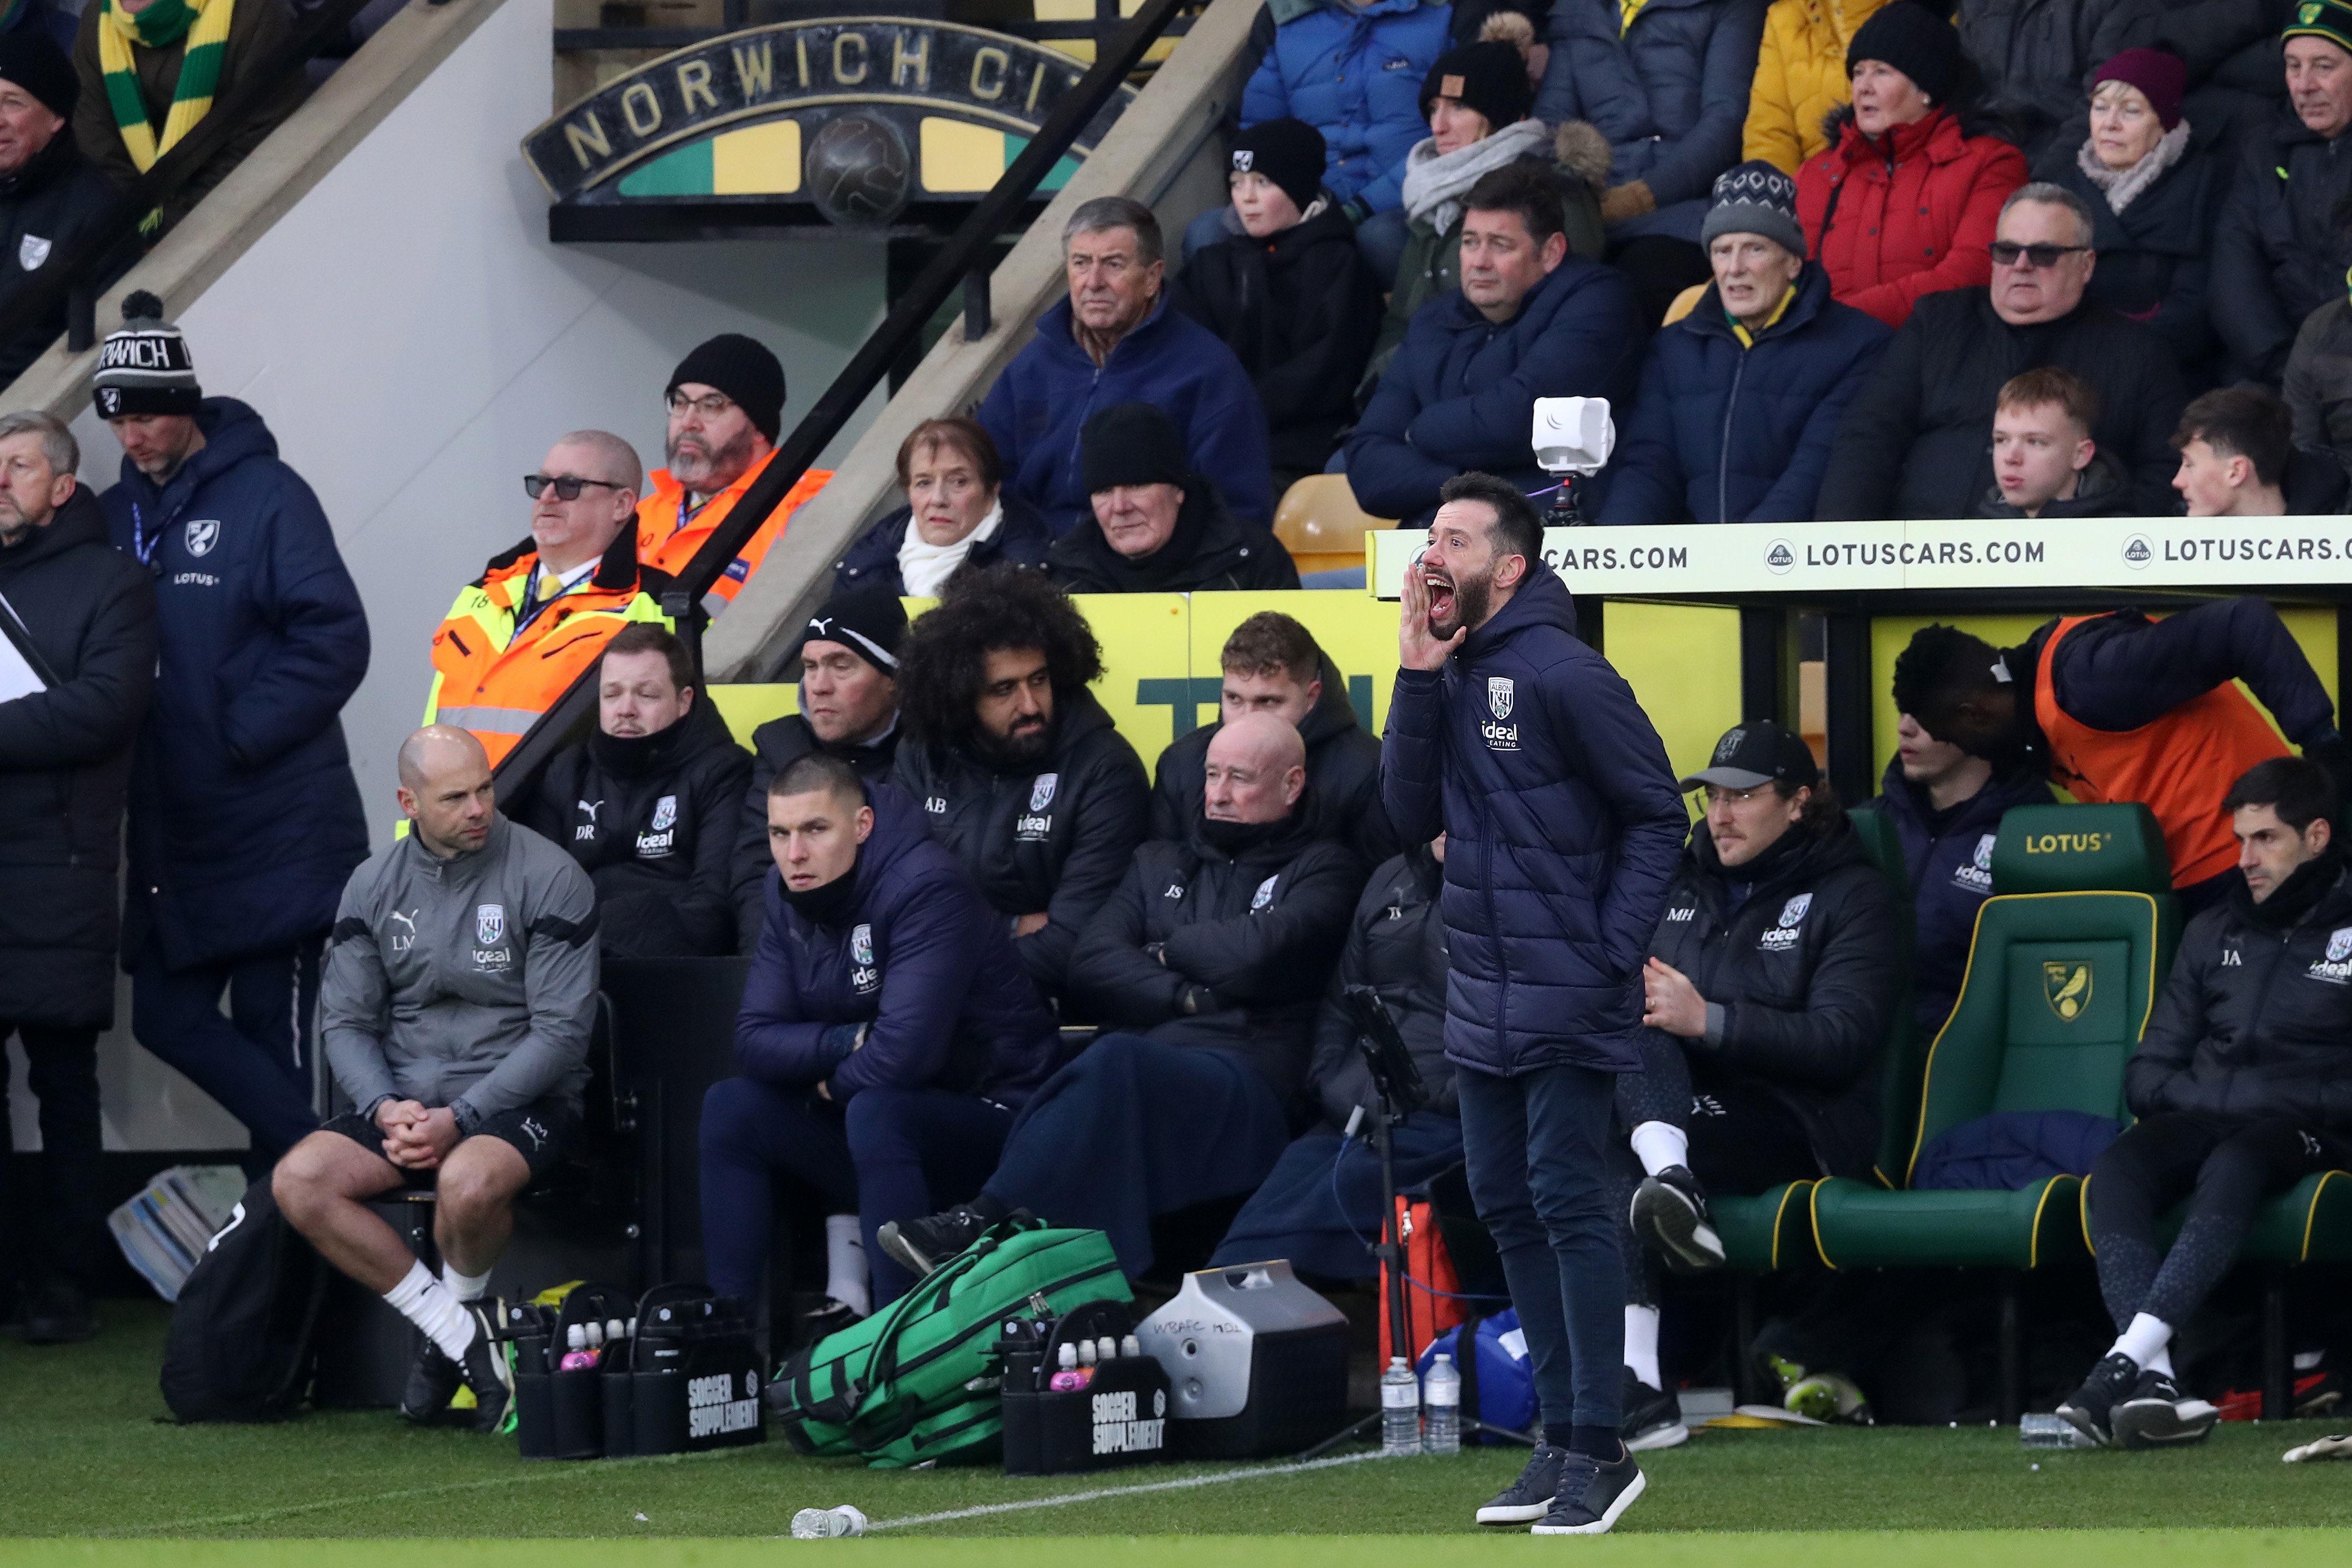 Carlos Corberán shouting on the sideline at Norwich City's Carrow Road